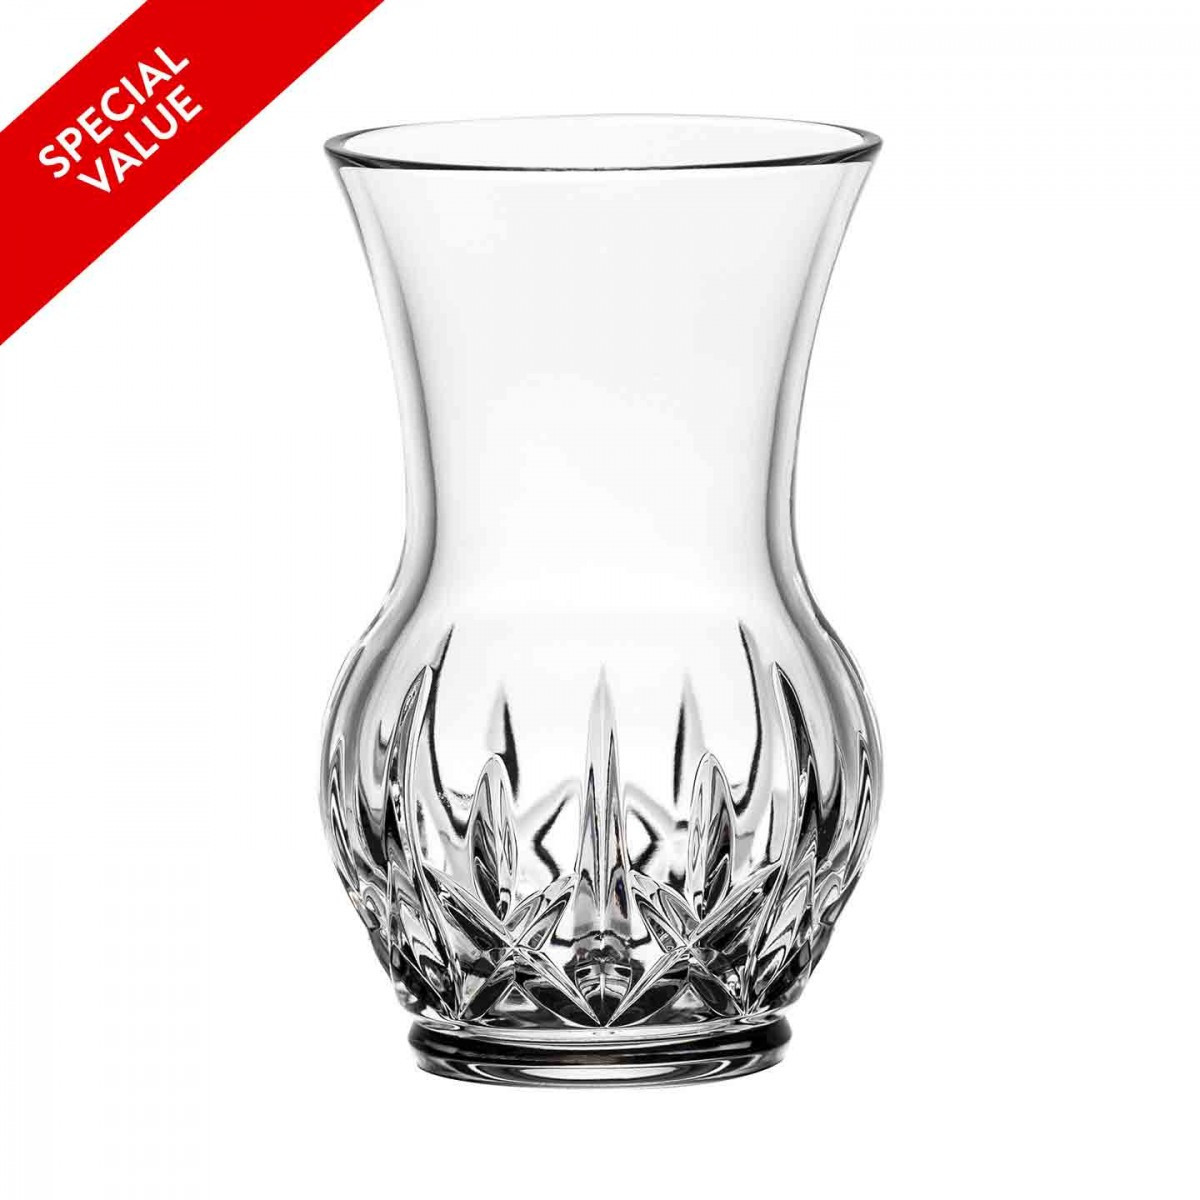 waterford vases discontinued of eimer 6in vase discontinued waterford us in eimer 6in vase discontinued